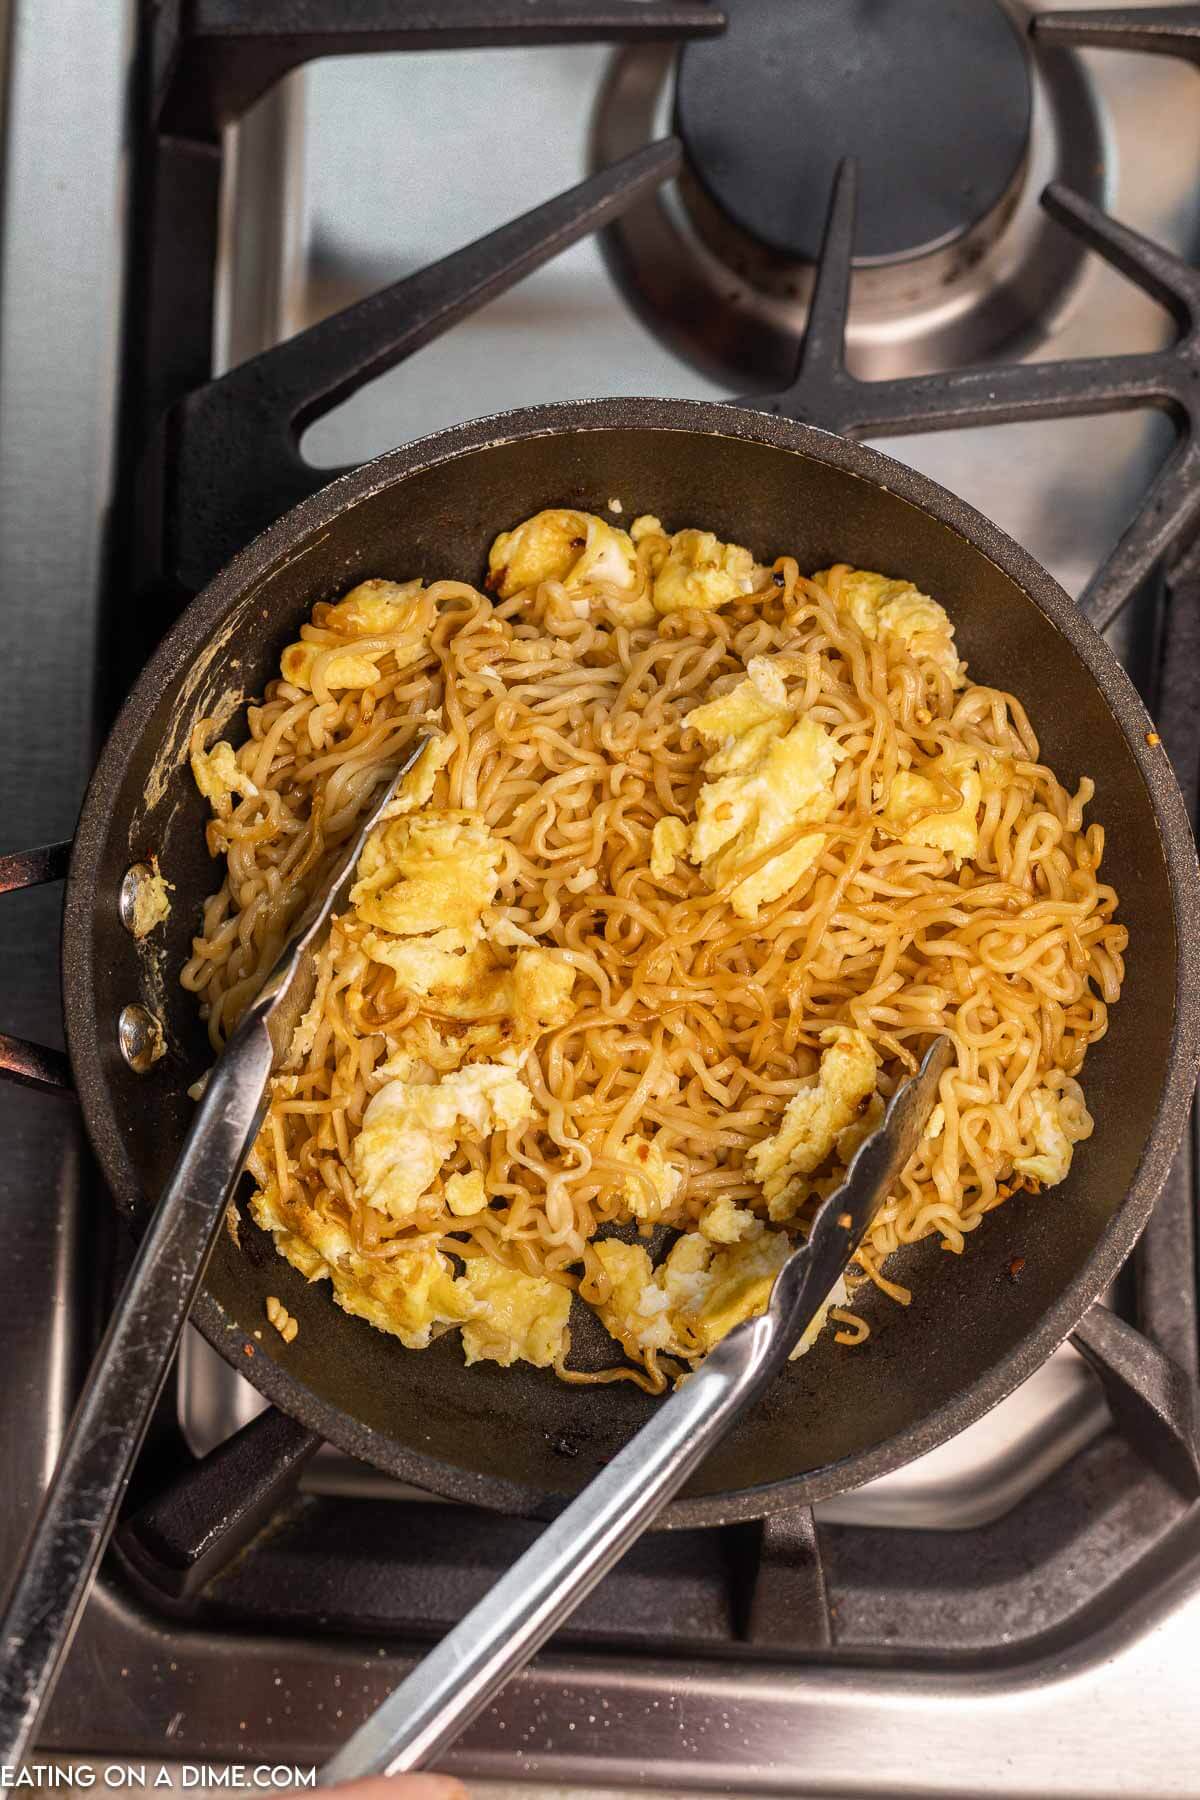 Tossing the noodles together with the scrambled eggs in a skillet